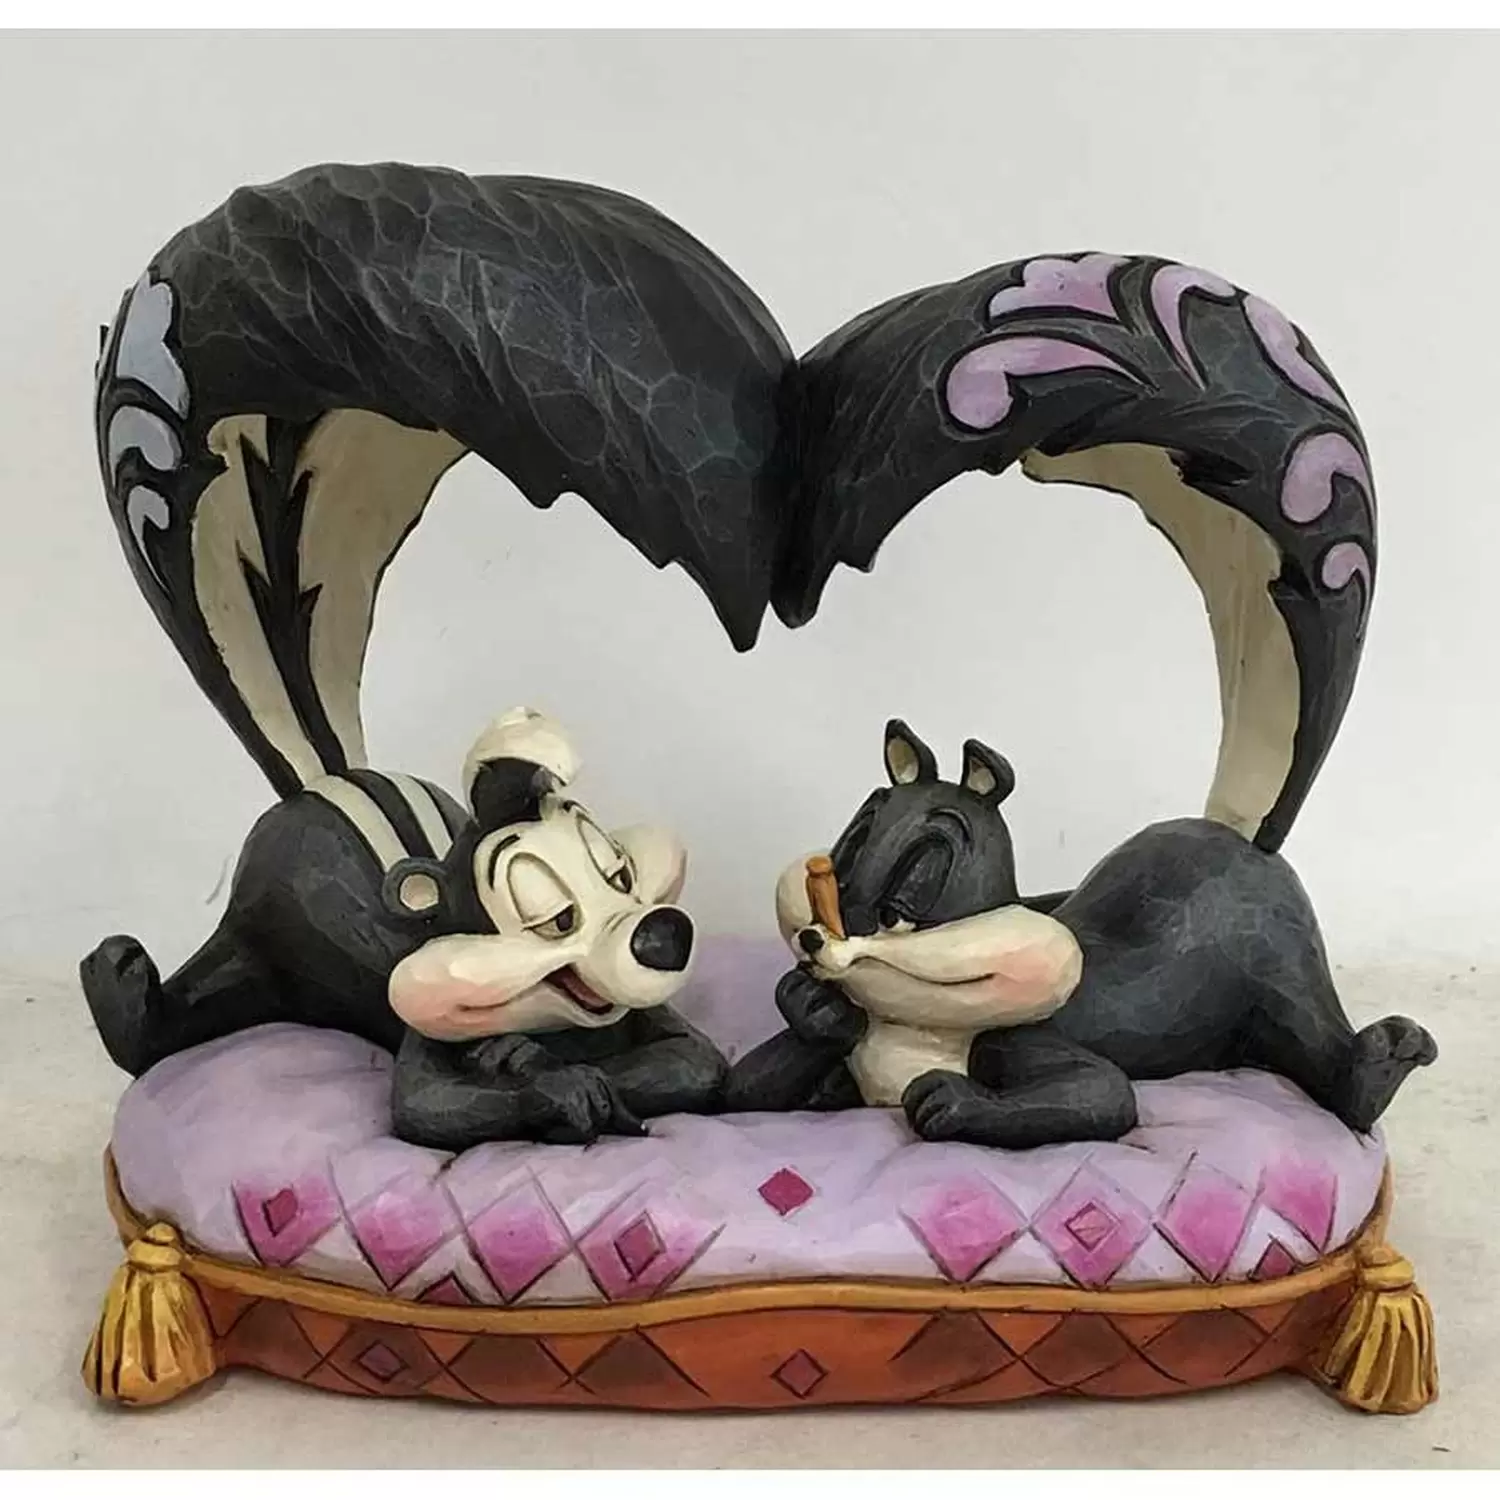 Looney Tunes characters by Jim Shore - Hello, Cherie - Pepe le Pew and Penelope